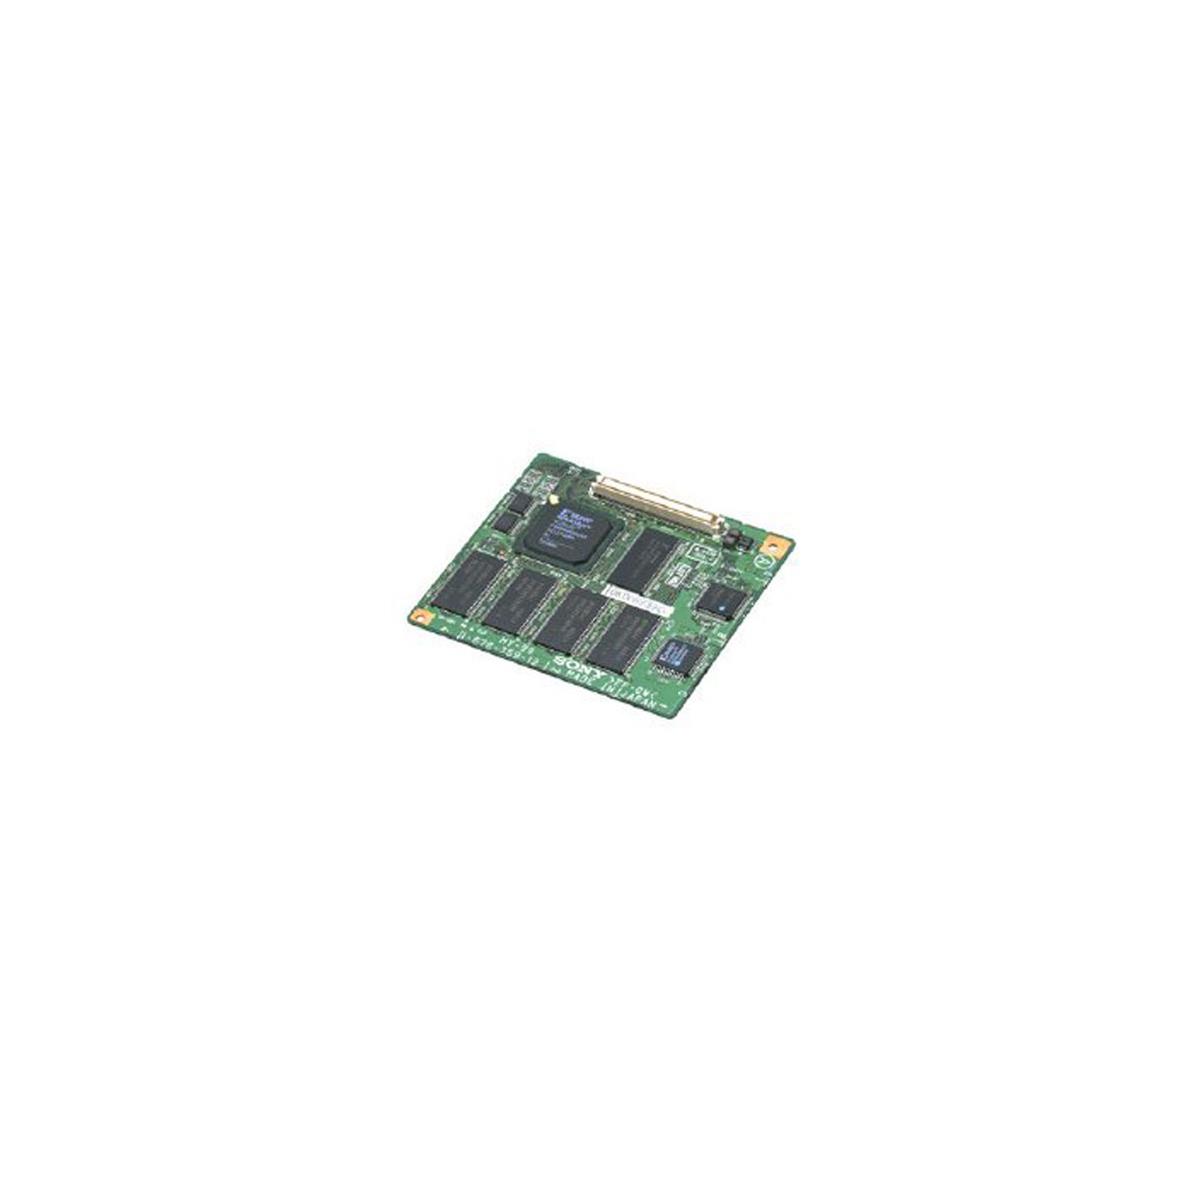 Image of Sony Picture Cache Board for HDW-790/HDW730S/HDWF900R Camcorders